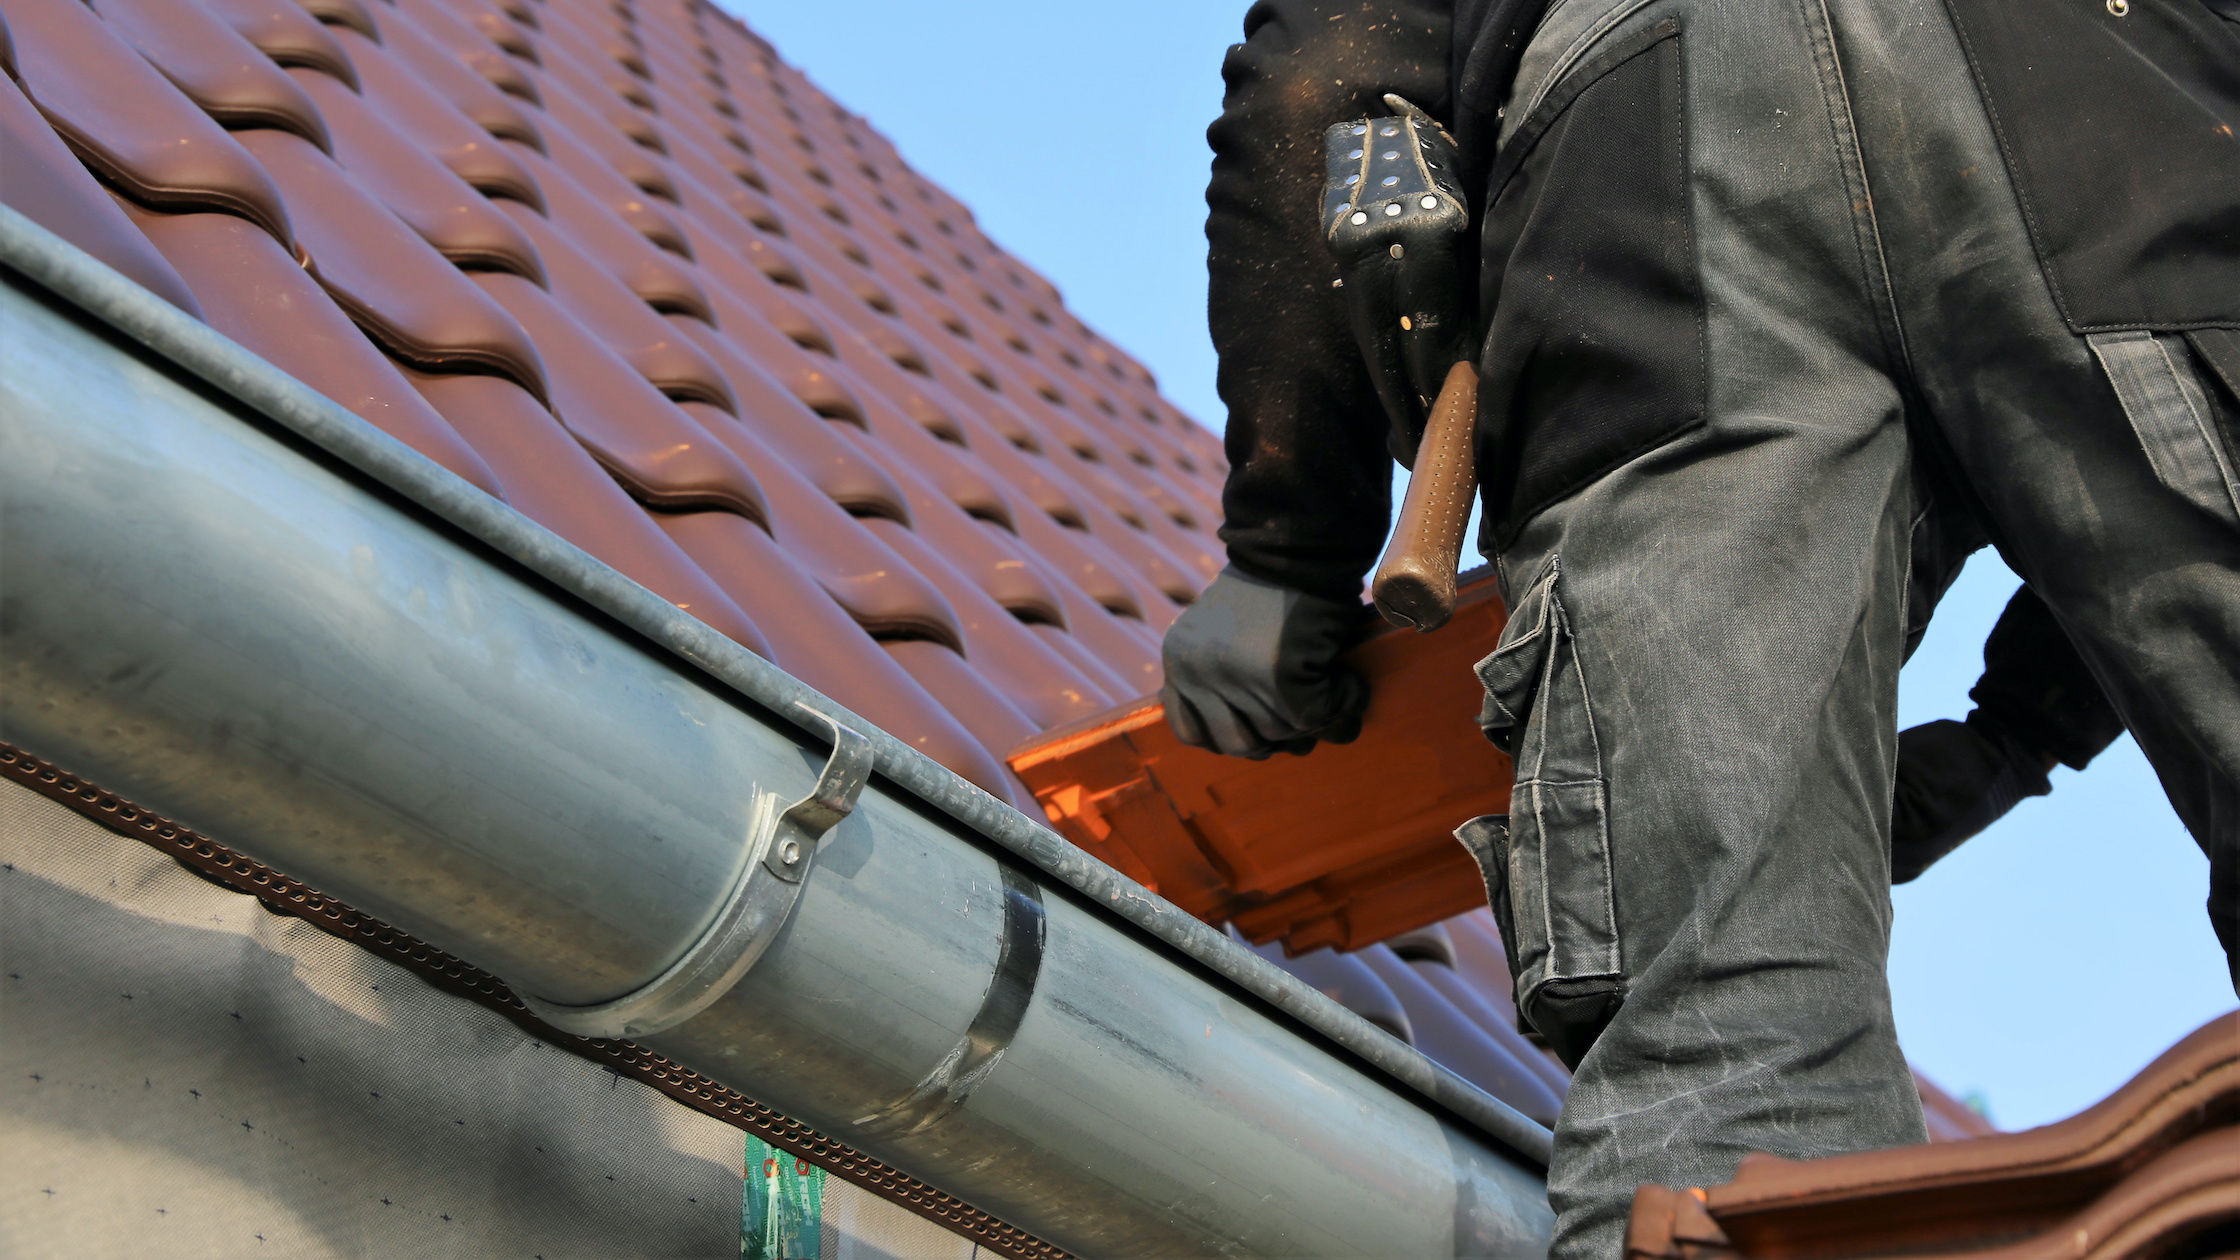 Guttering and roof repairs